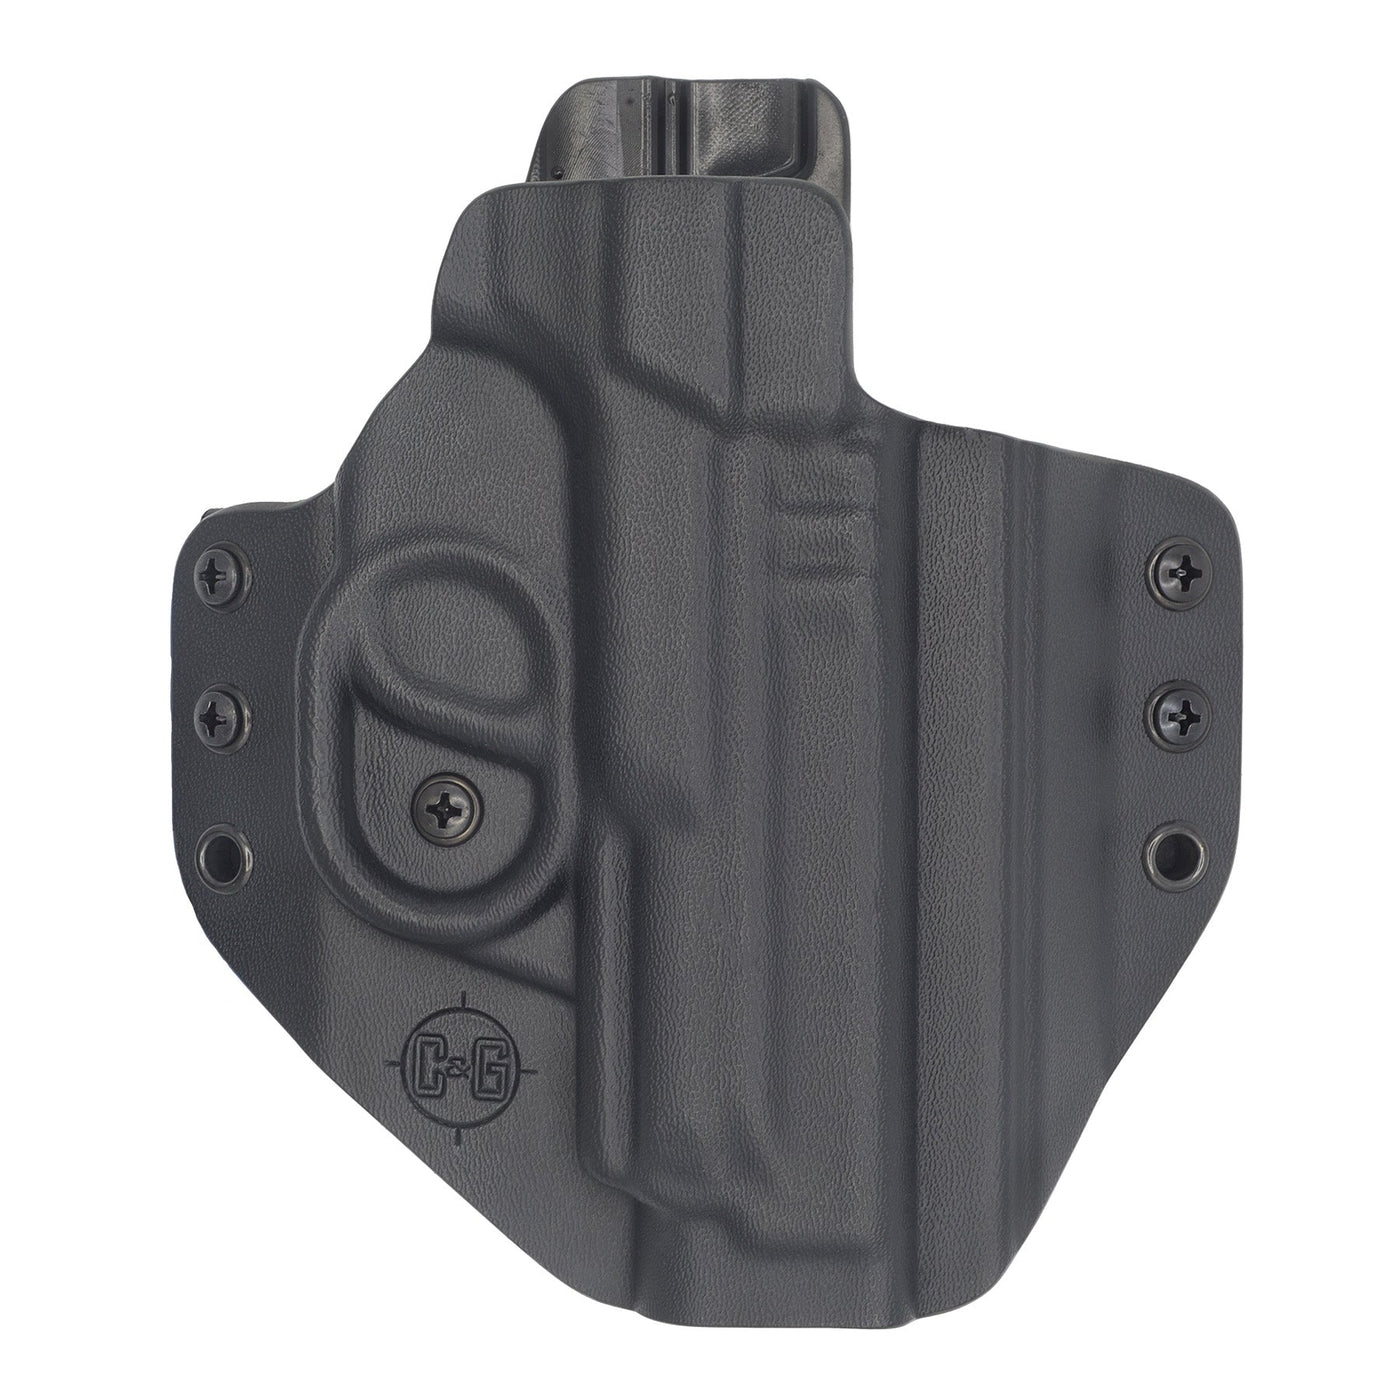 C&G Holsters quick ship Covert OWB kydex holster for Smith & Wesson M&P 2.0 9/40 front view without gun